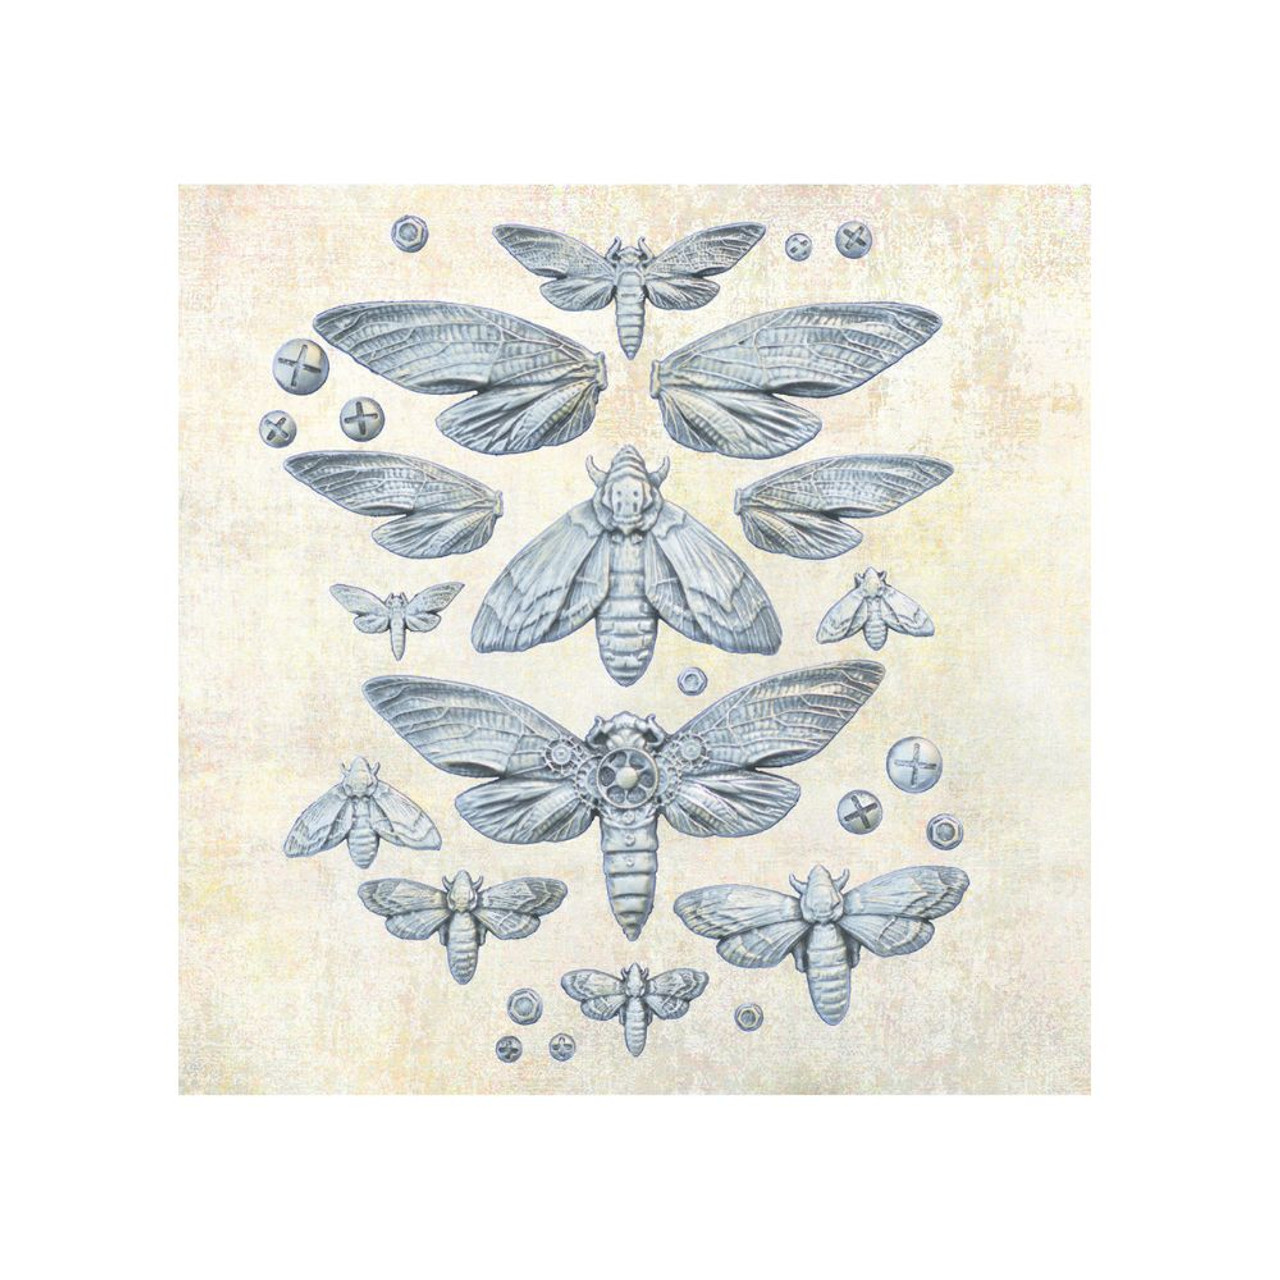 Prima Decor Mould - Nocturnal Insects 5x8" finished pieces